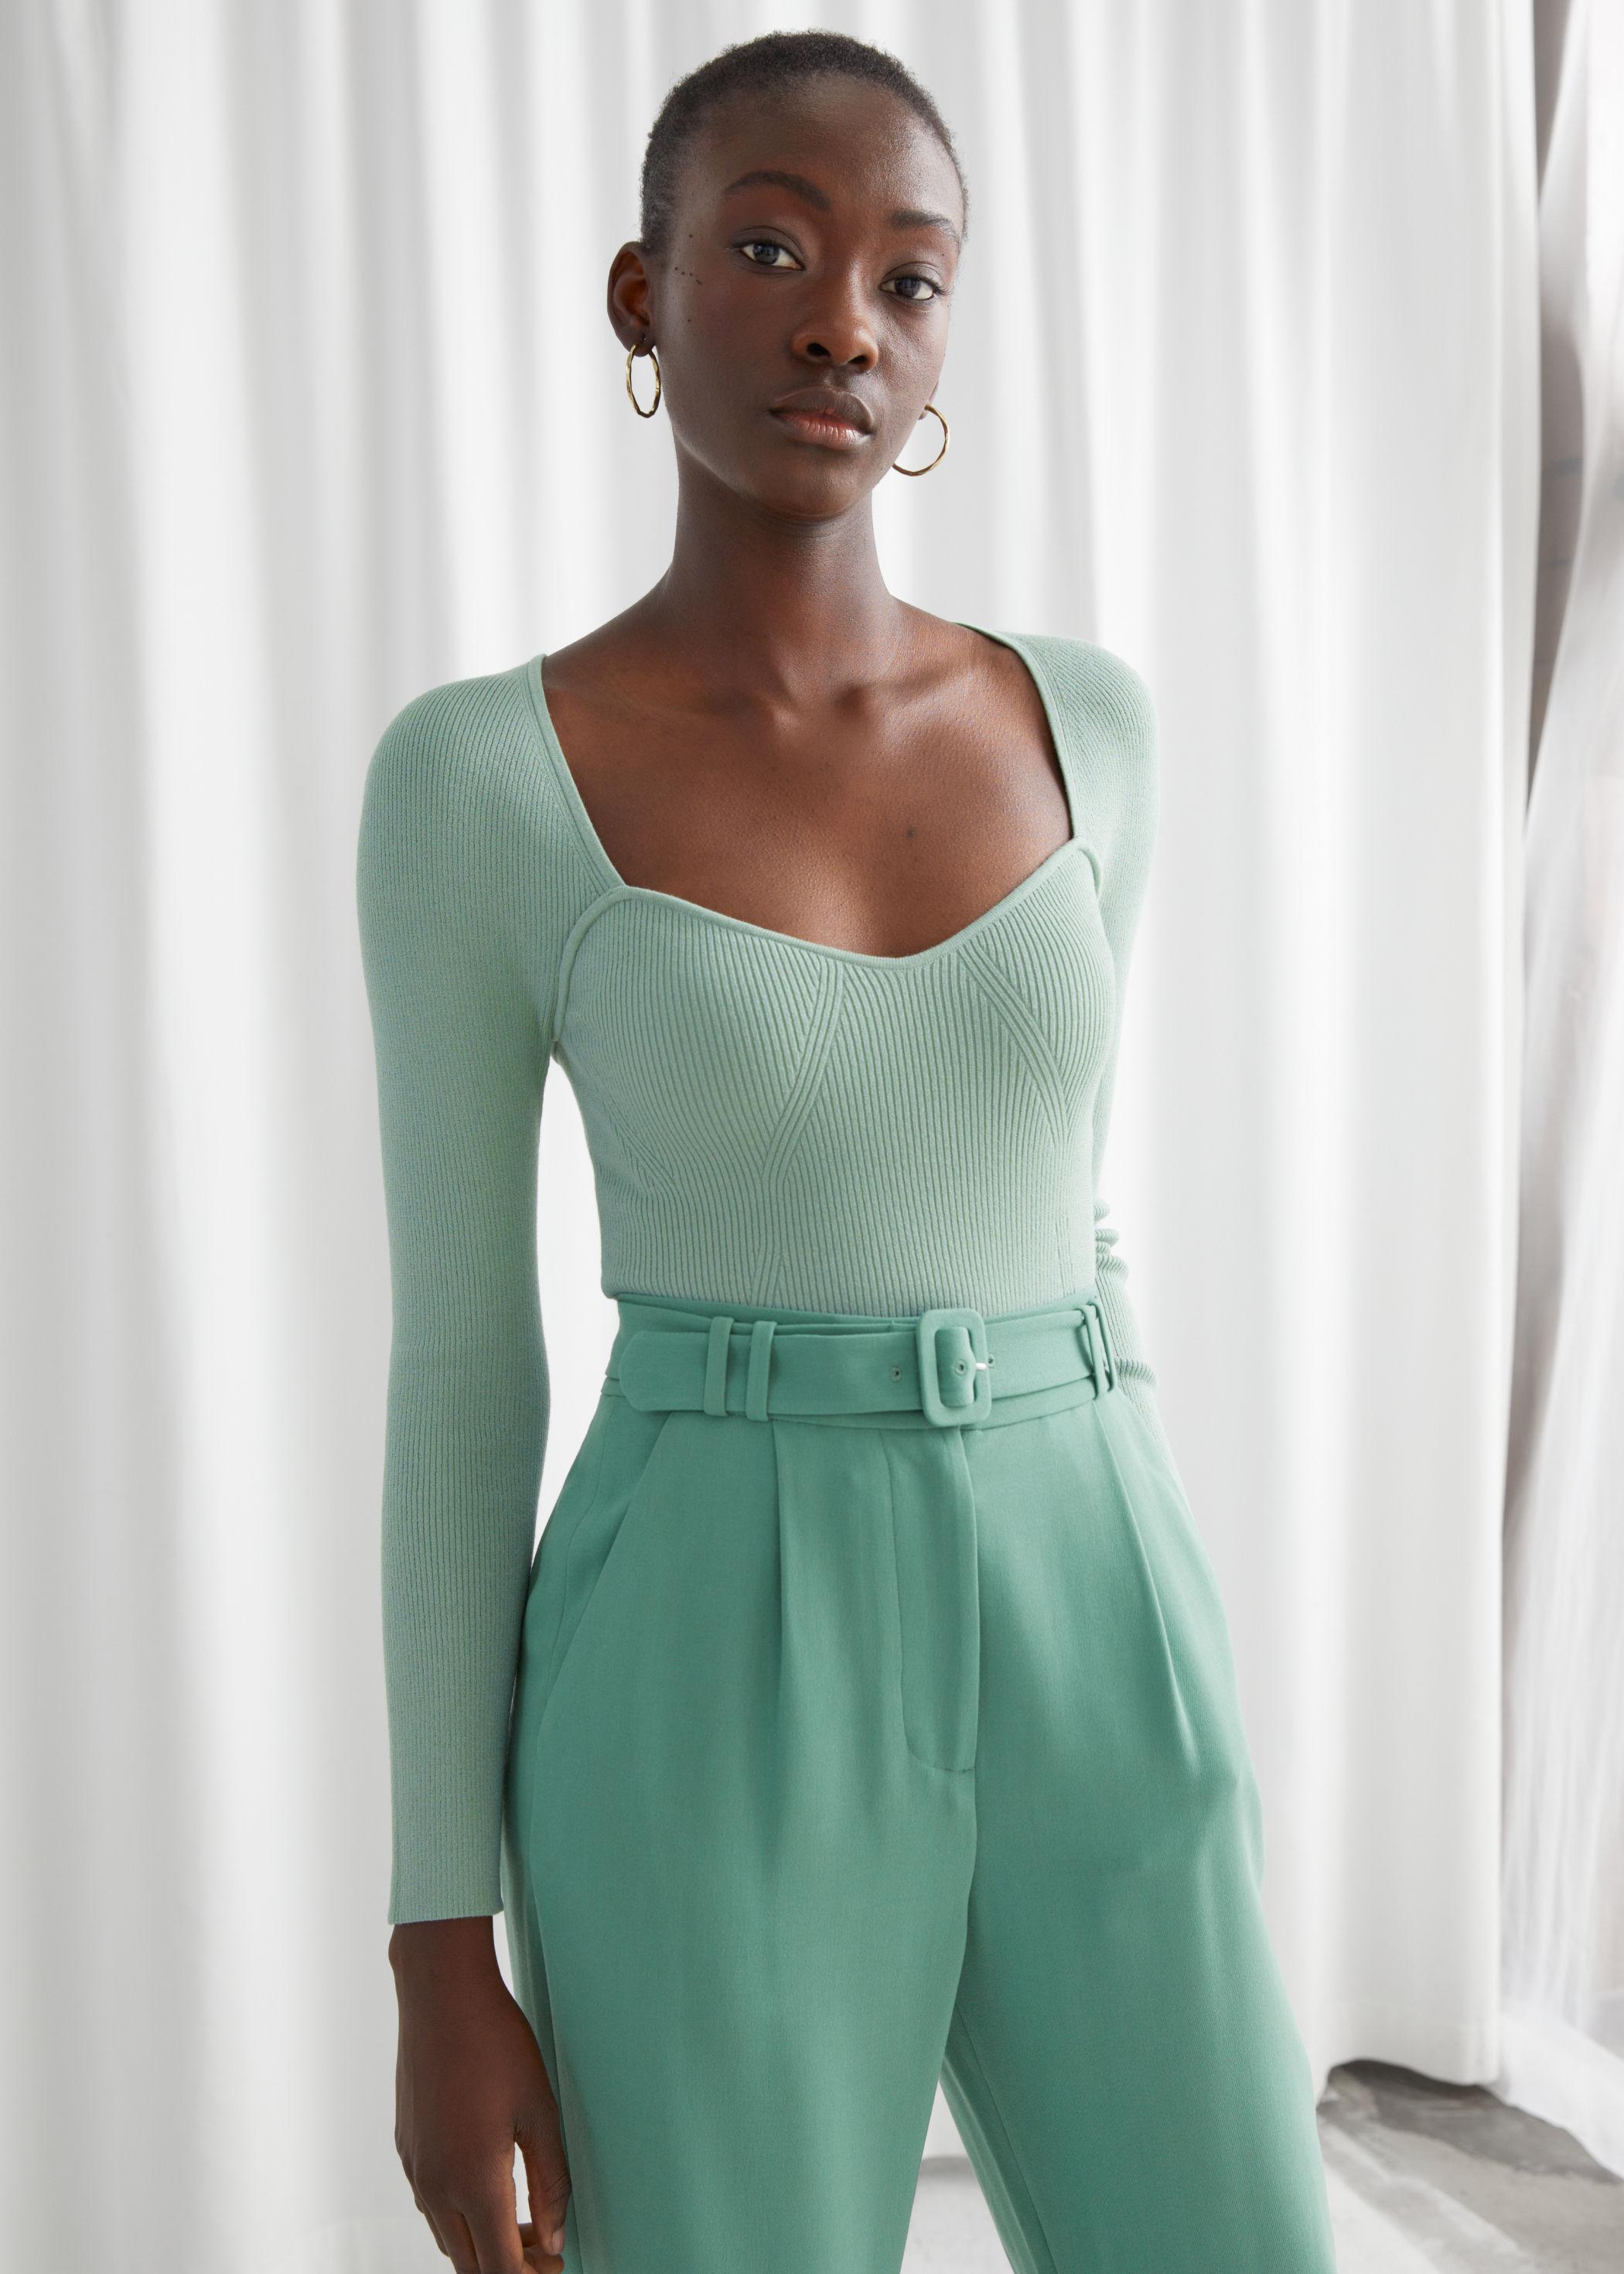 & Stories Cropped Sweetheart Neck Rib Green | Lyst